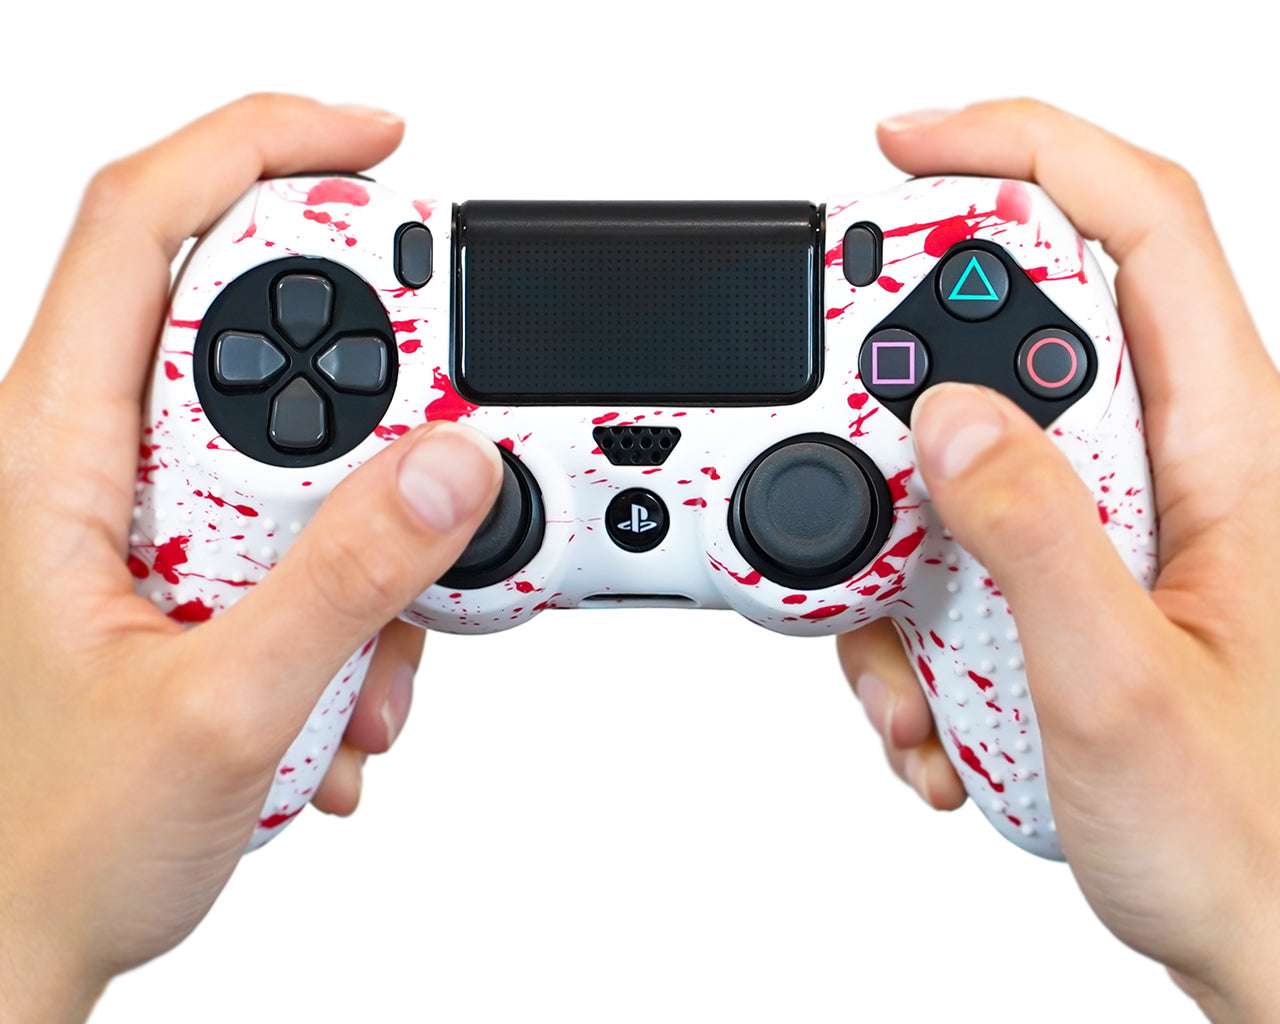 blood splatter ps4 controller hydro dipped silicone case grip cover